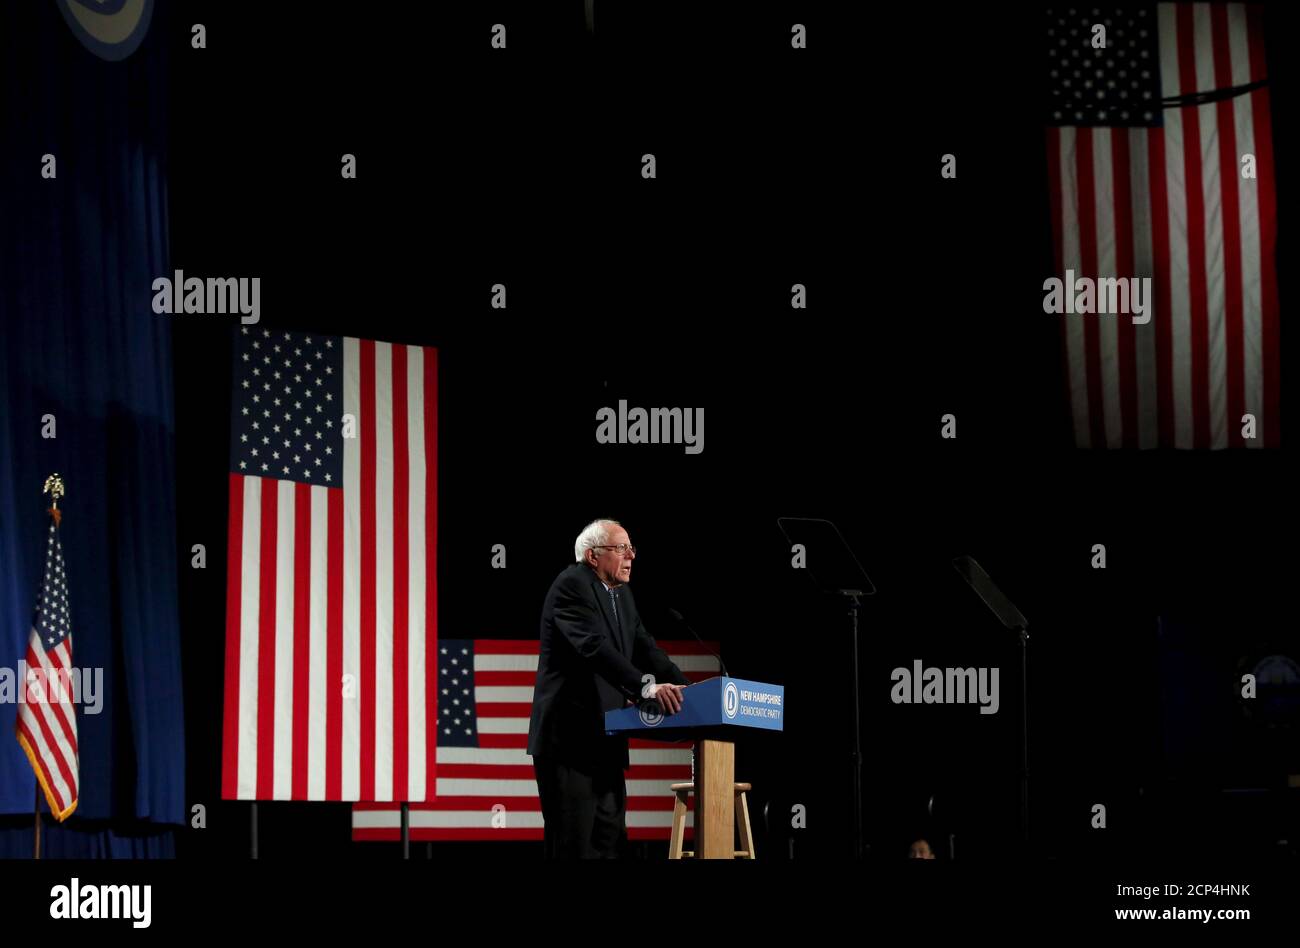 Democratic U.S. presidential candidate Bernie Sanders speaks at the 2016 McIntyre-Shaheen 100 Club Celebration at the Verizon Wireless Arena in Manchester, New Hampshire February 5, 2016.   REUTERS/Shannon Stapleton Stock Photo